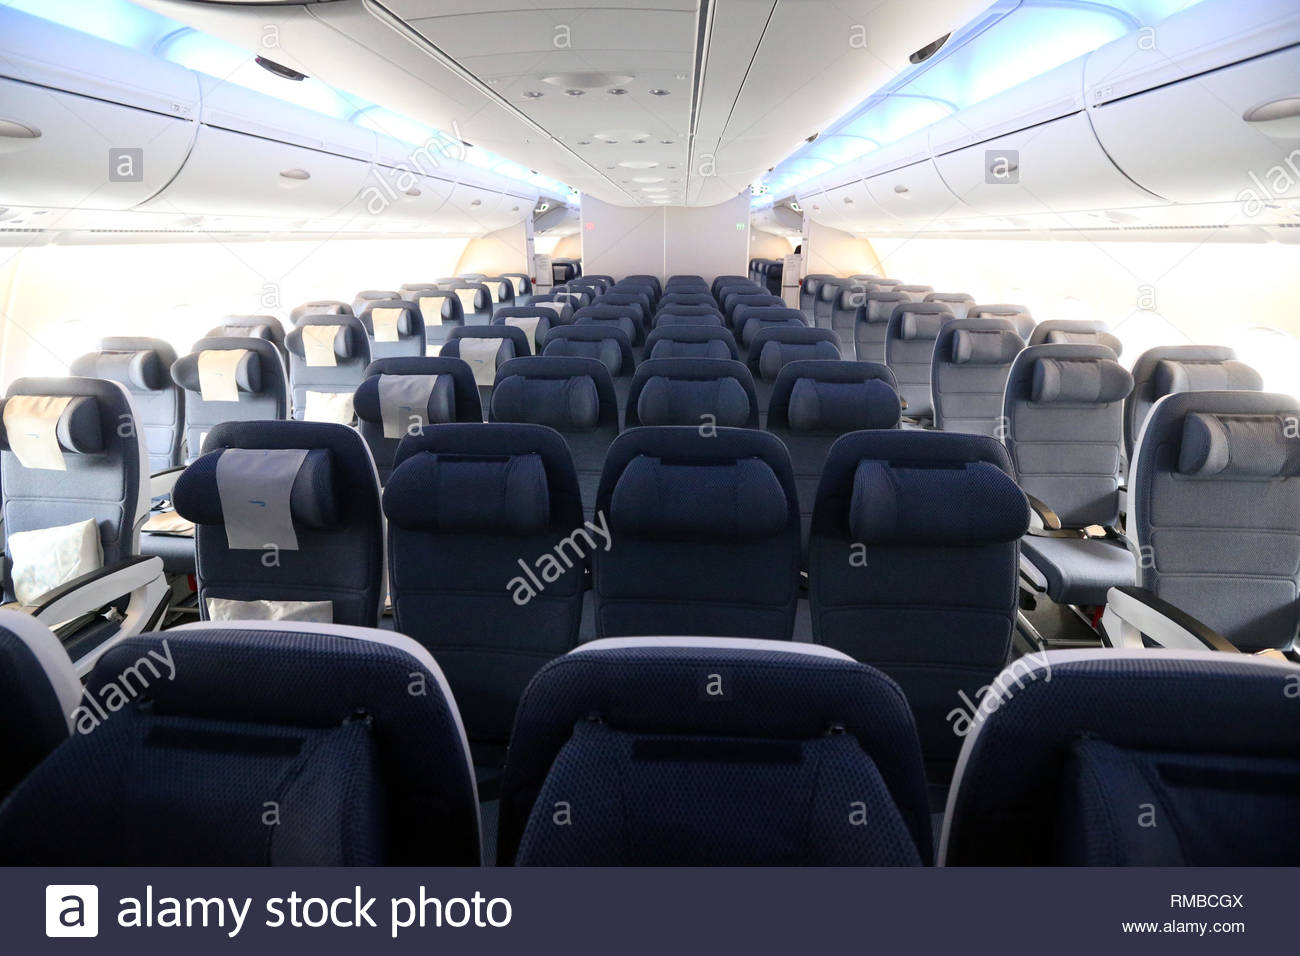 File Photo Dated 4 7 2013 Of The Economy Seats Of A British